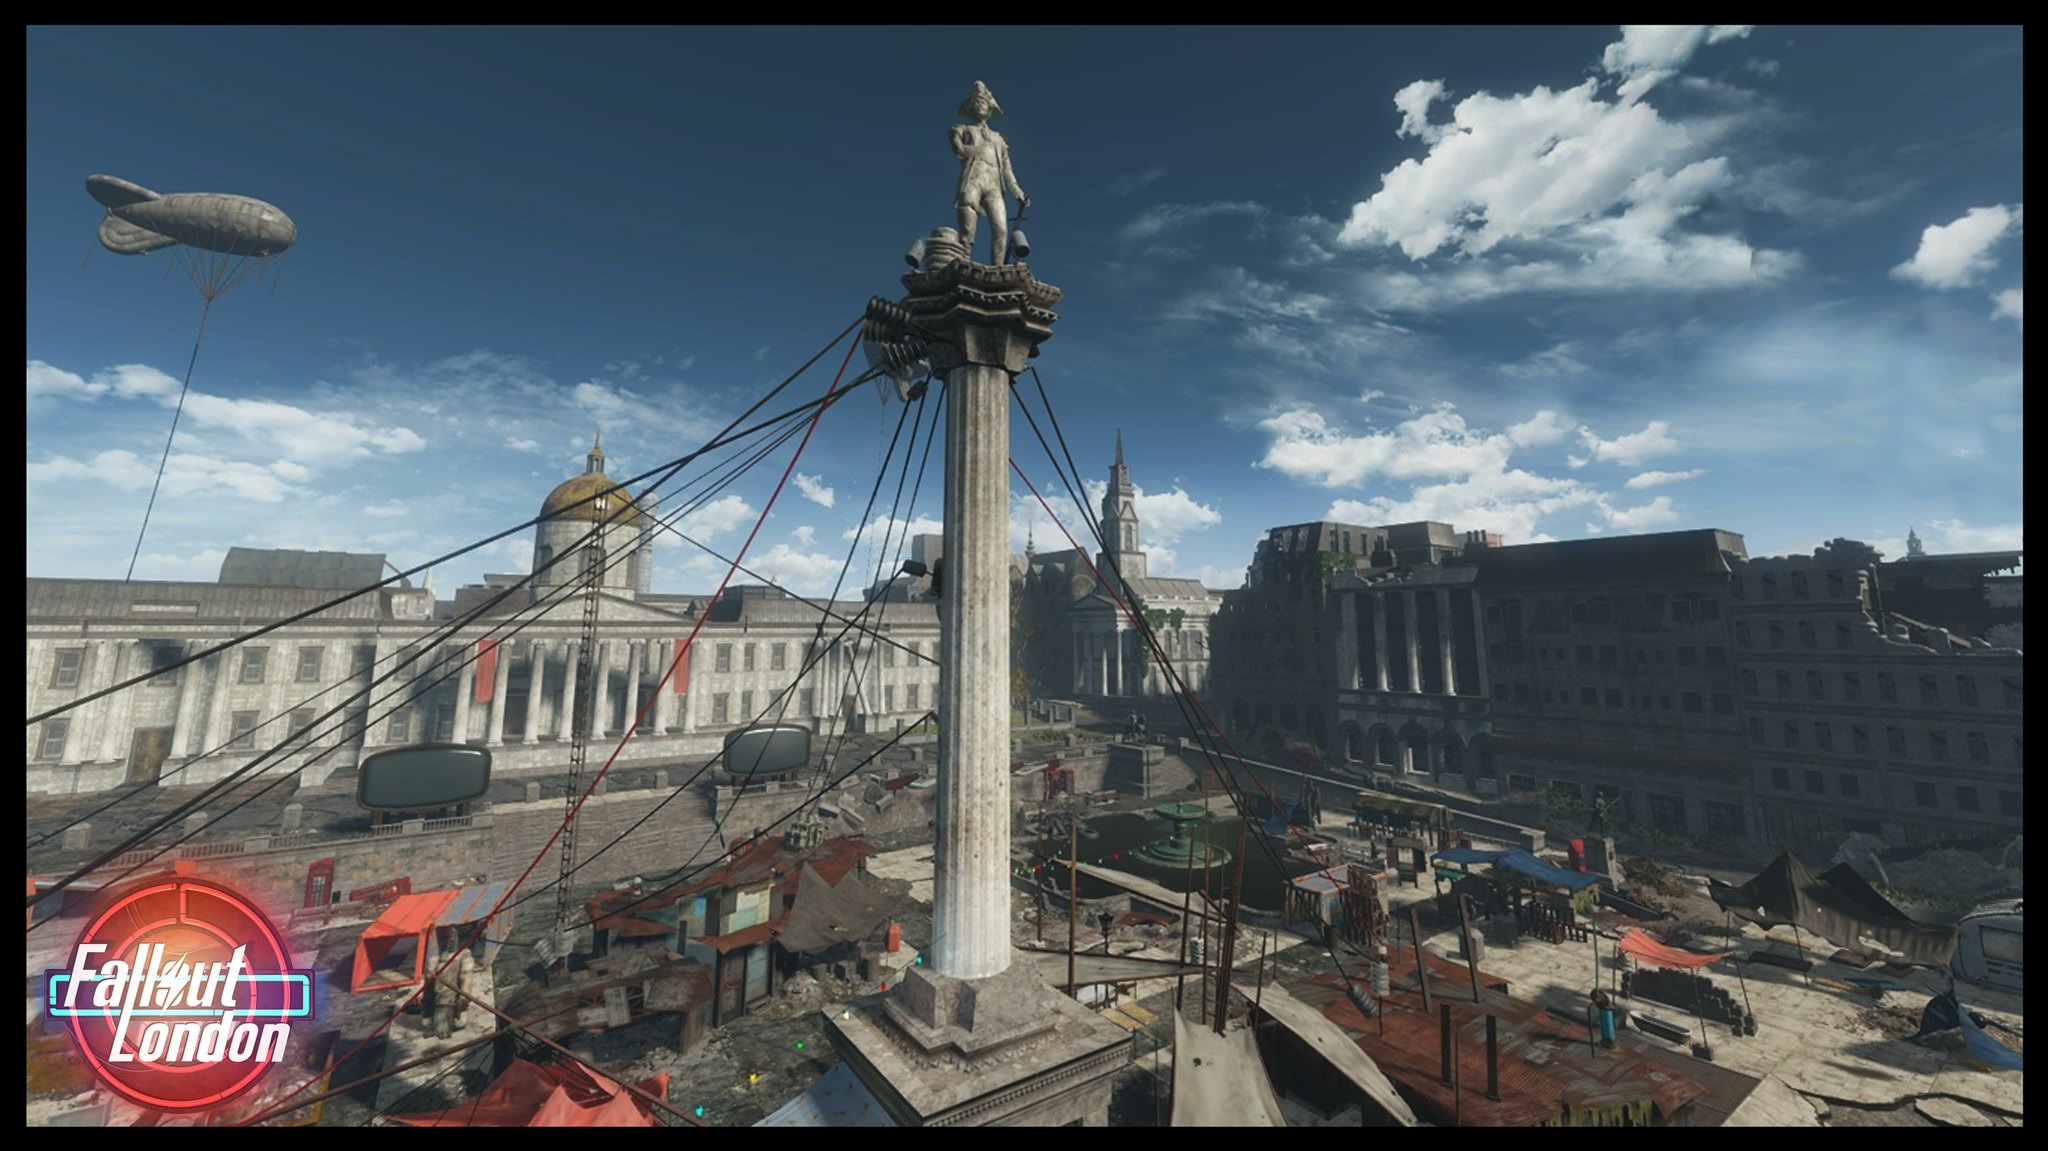 Fallout: London image of downtown